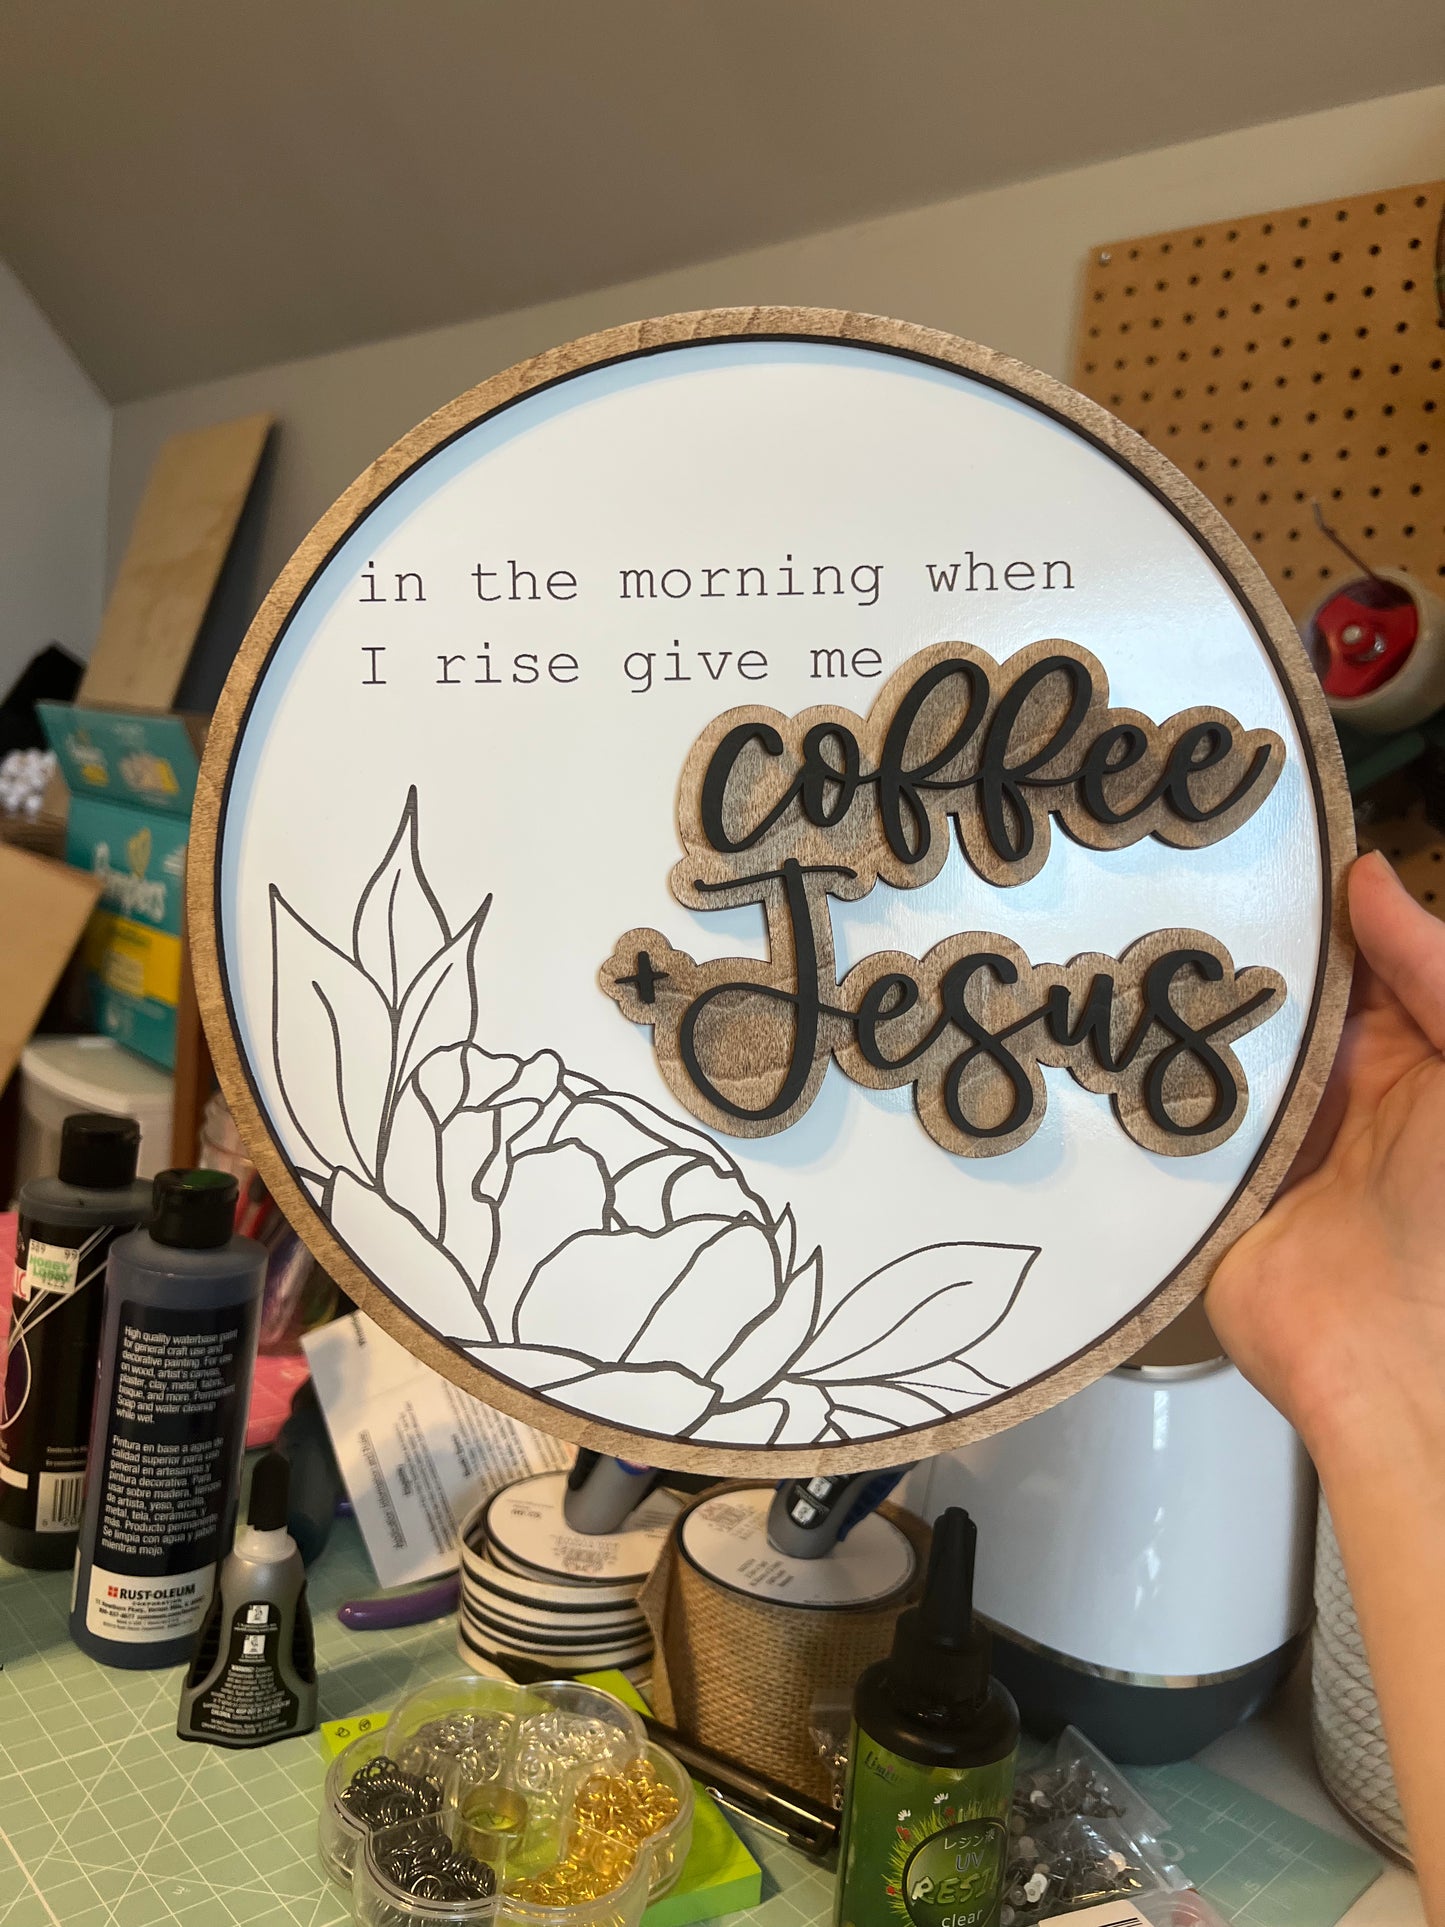 When I rise give me Coffee + Jesus